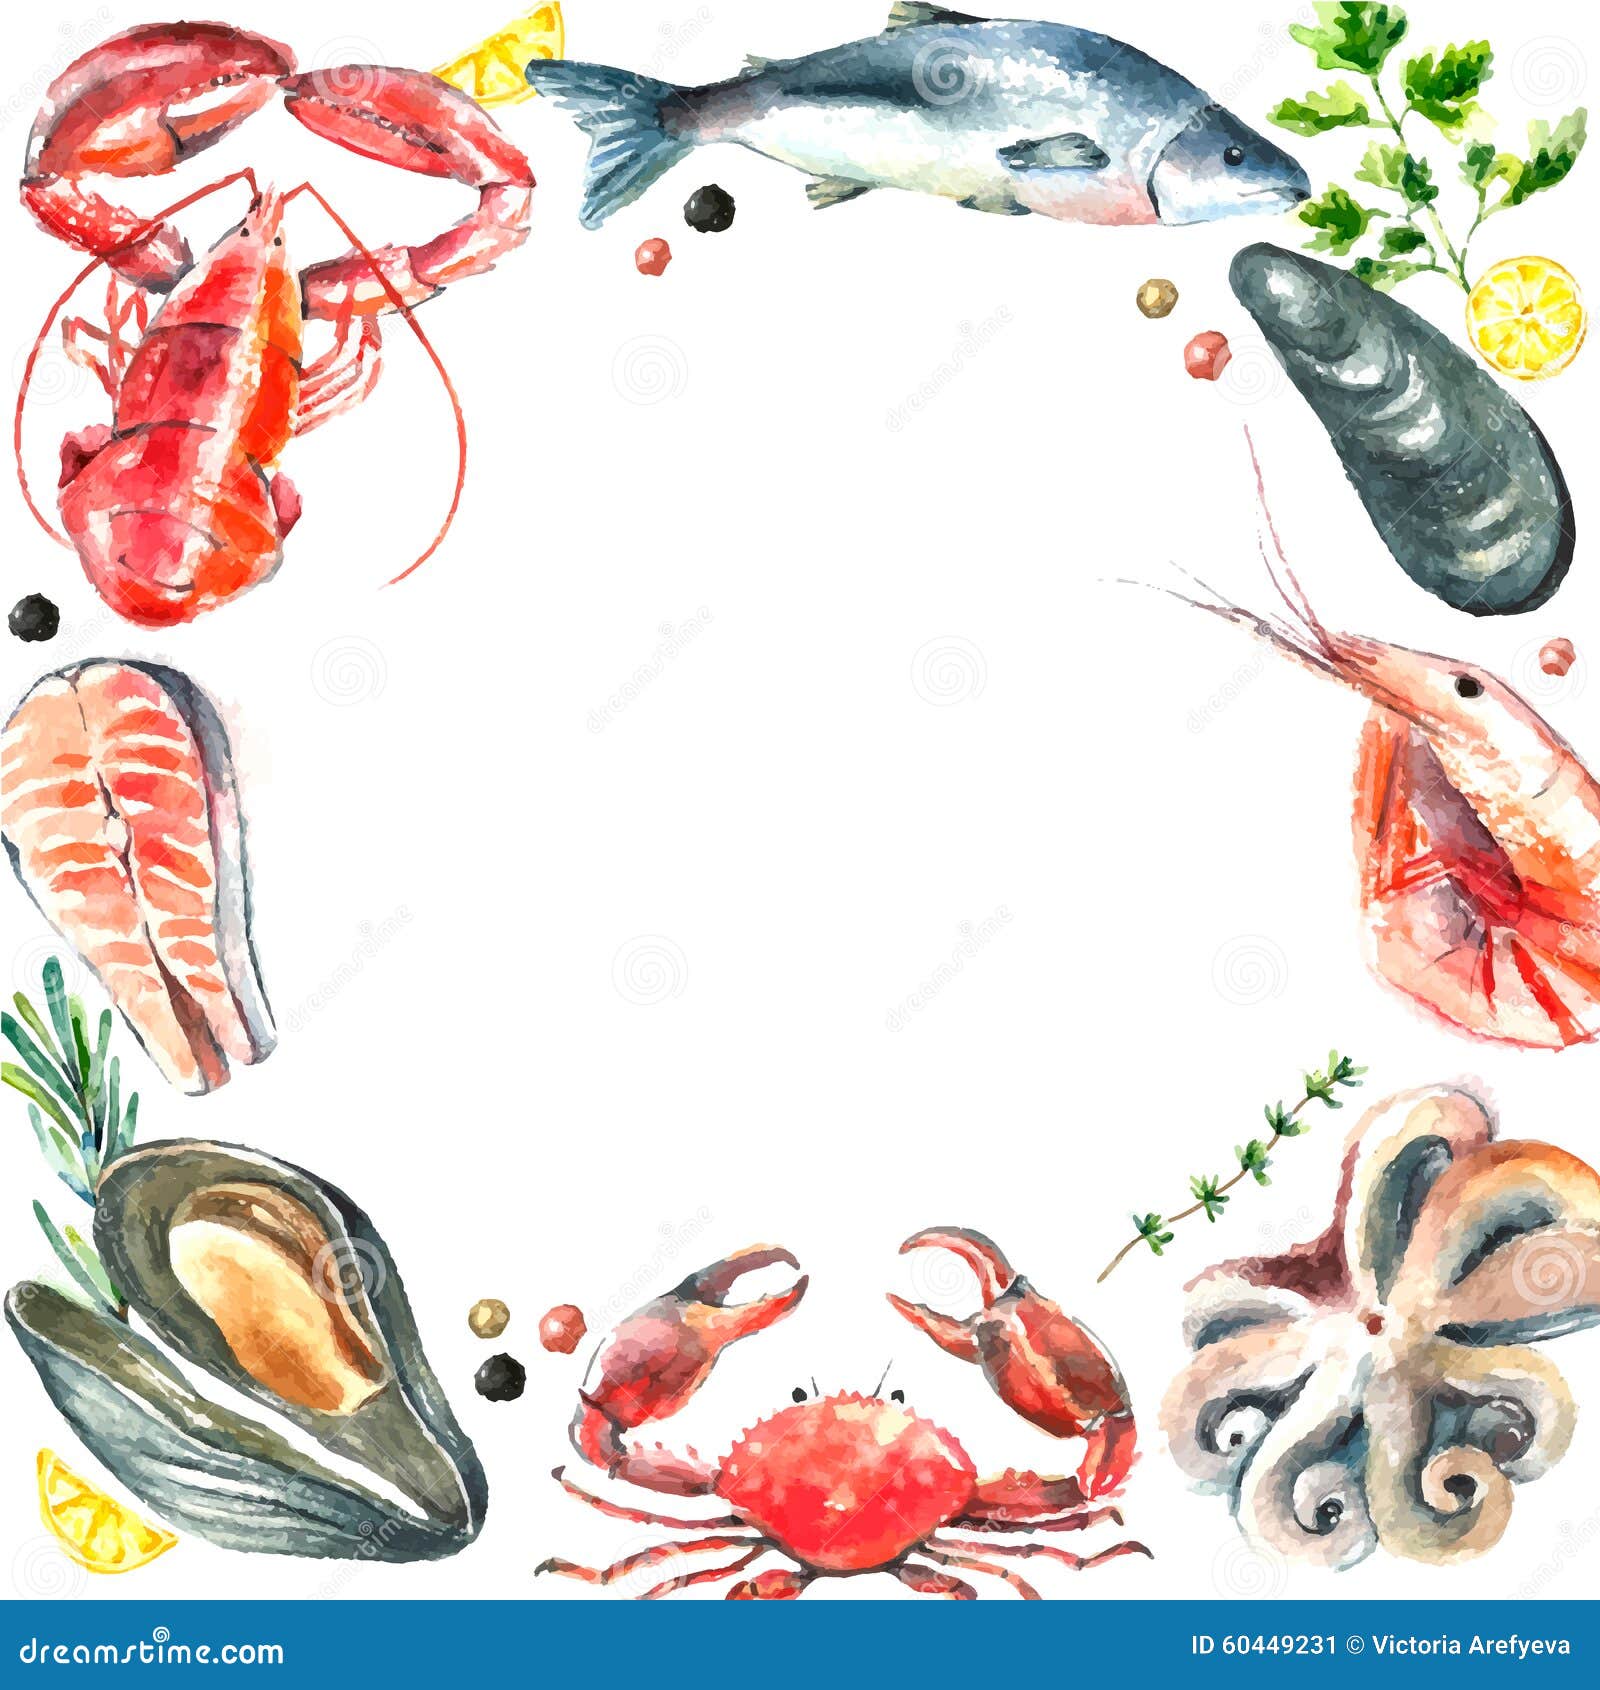 Set of seafood watercolor stock vector Illustration of 